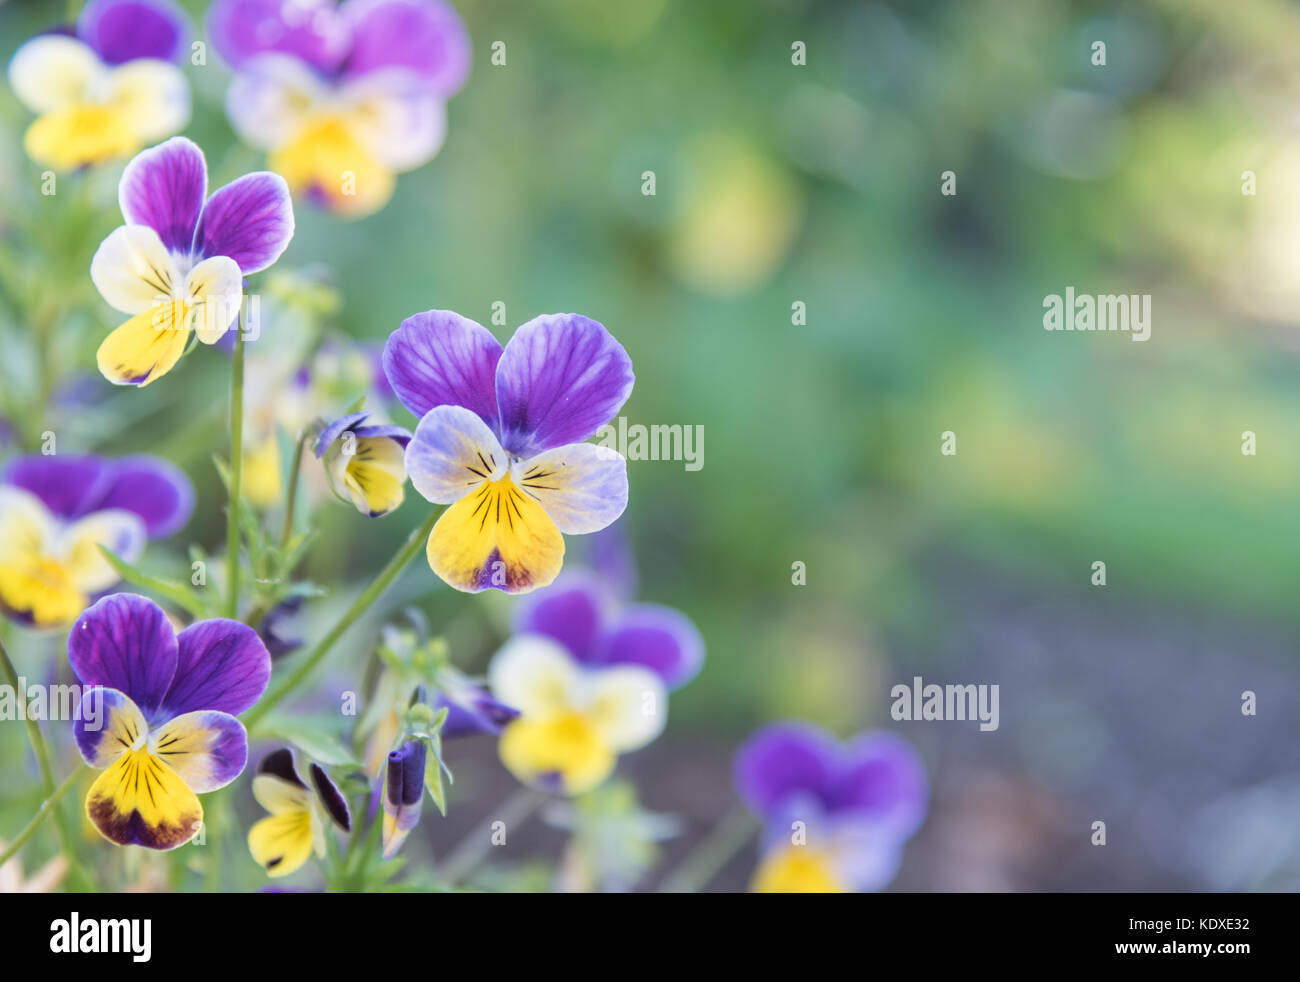 Purple and Yellow Johnny Jump-Ups (Violas) with green background Stock Photo